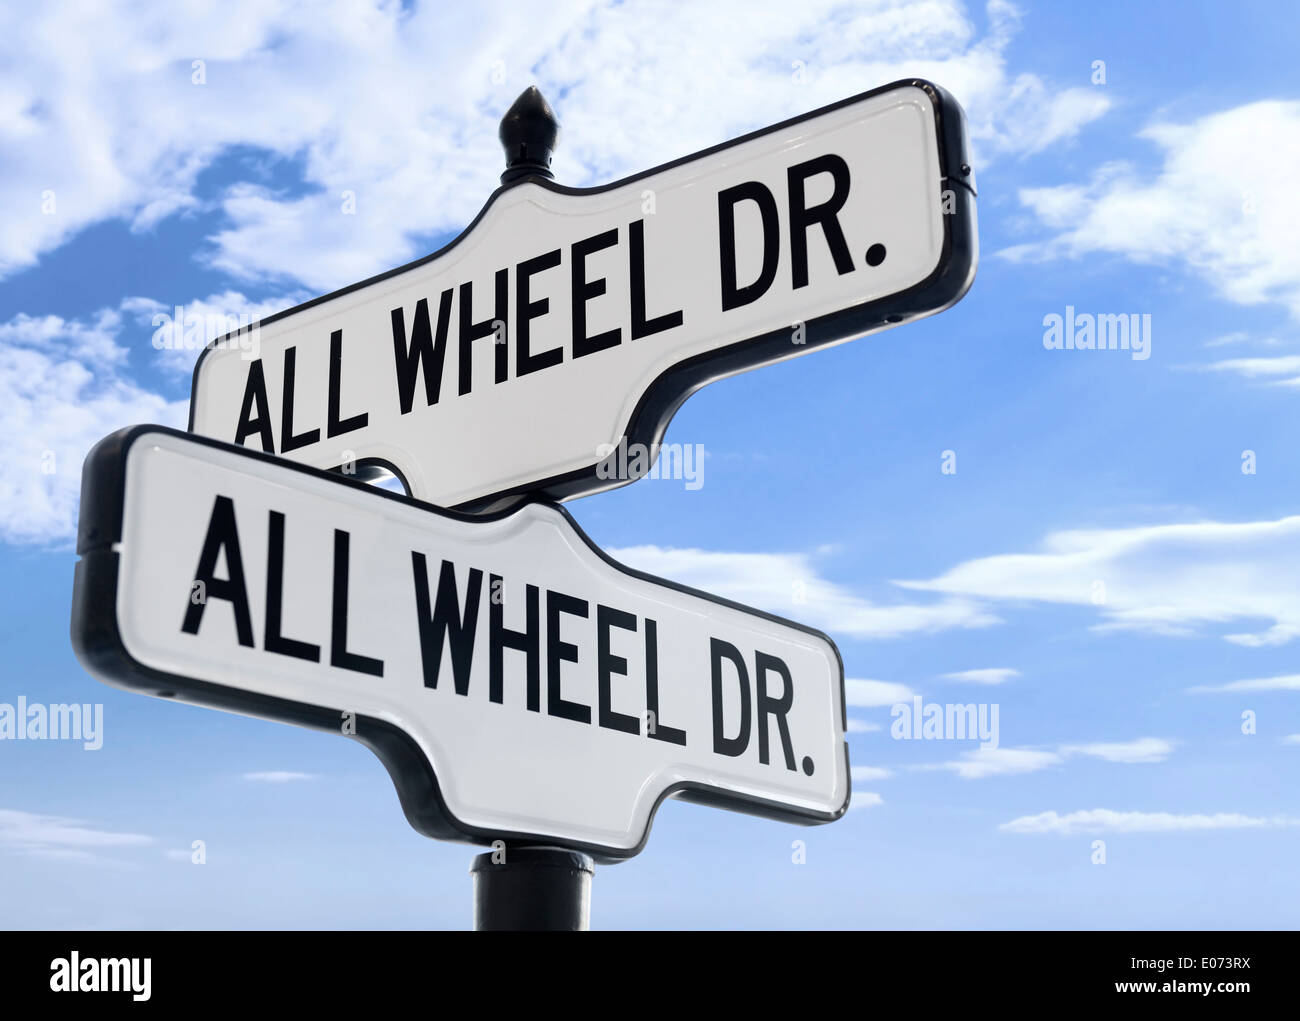 All Wheel Drive two street signs over blue skies isolated with clipping path Stock Photo